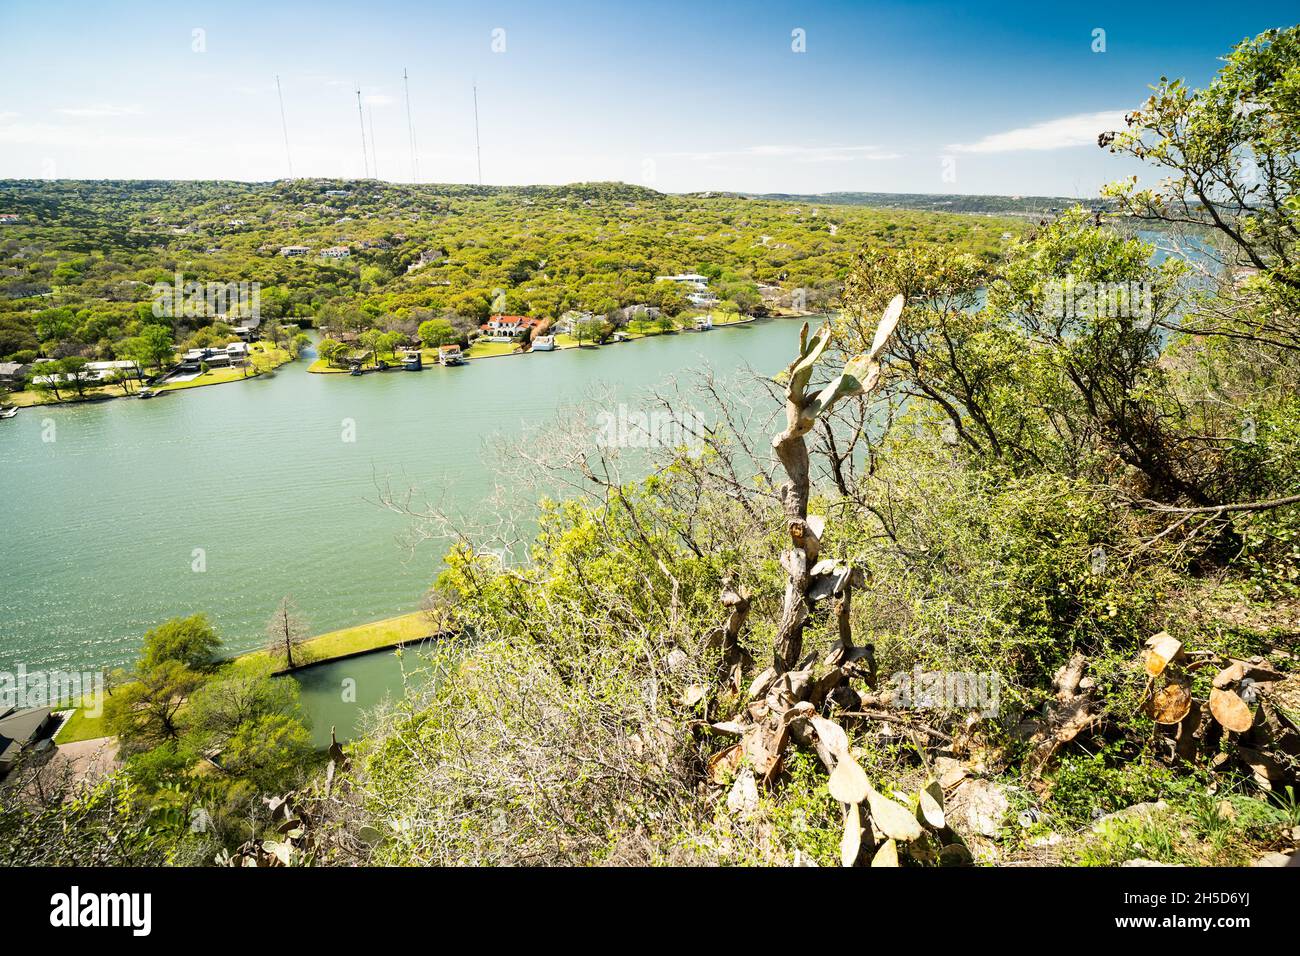 Colorado River in Austin Texas with Big Houses on the Waterfront and Boat Houses Stock Photo